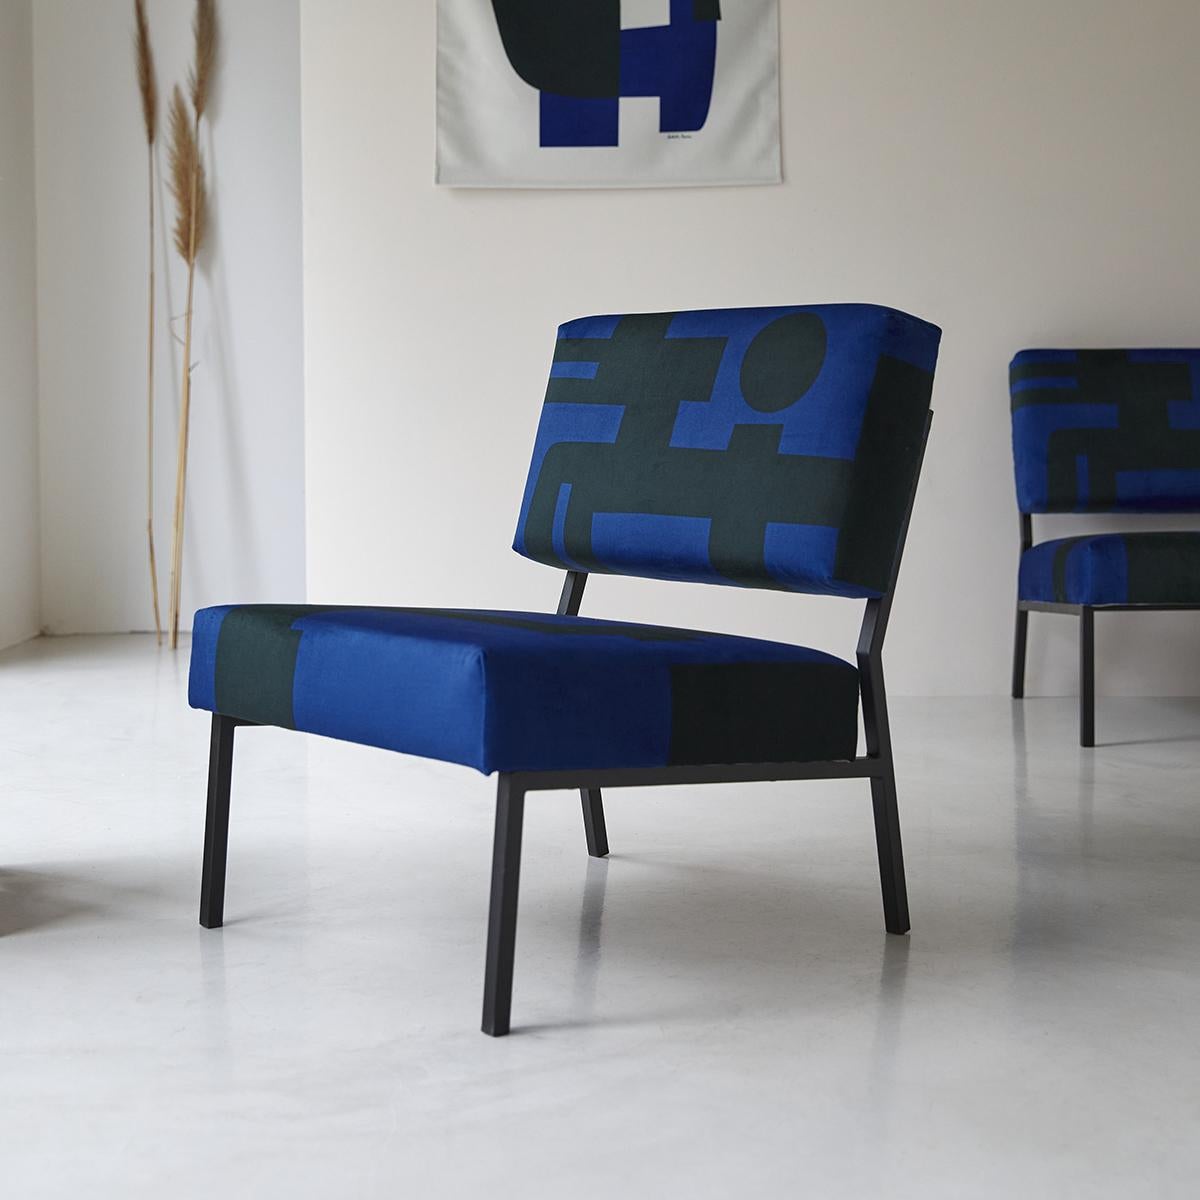 Barbican blue O2 armchair by Babel Brune
Dimensions: D 63 x W 54 x H 67 cm, Seat H 35 cm.
Material: Suede velvet printed in France, steel.

Inspired by the style of the 70's, the Barbican Blue Armchair, designed for Tikamoon, offers a unique